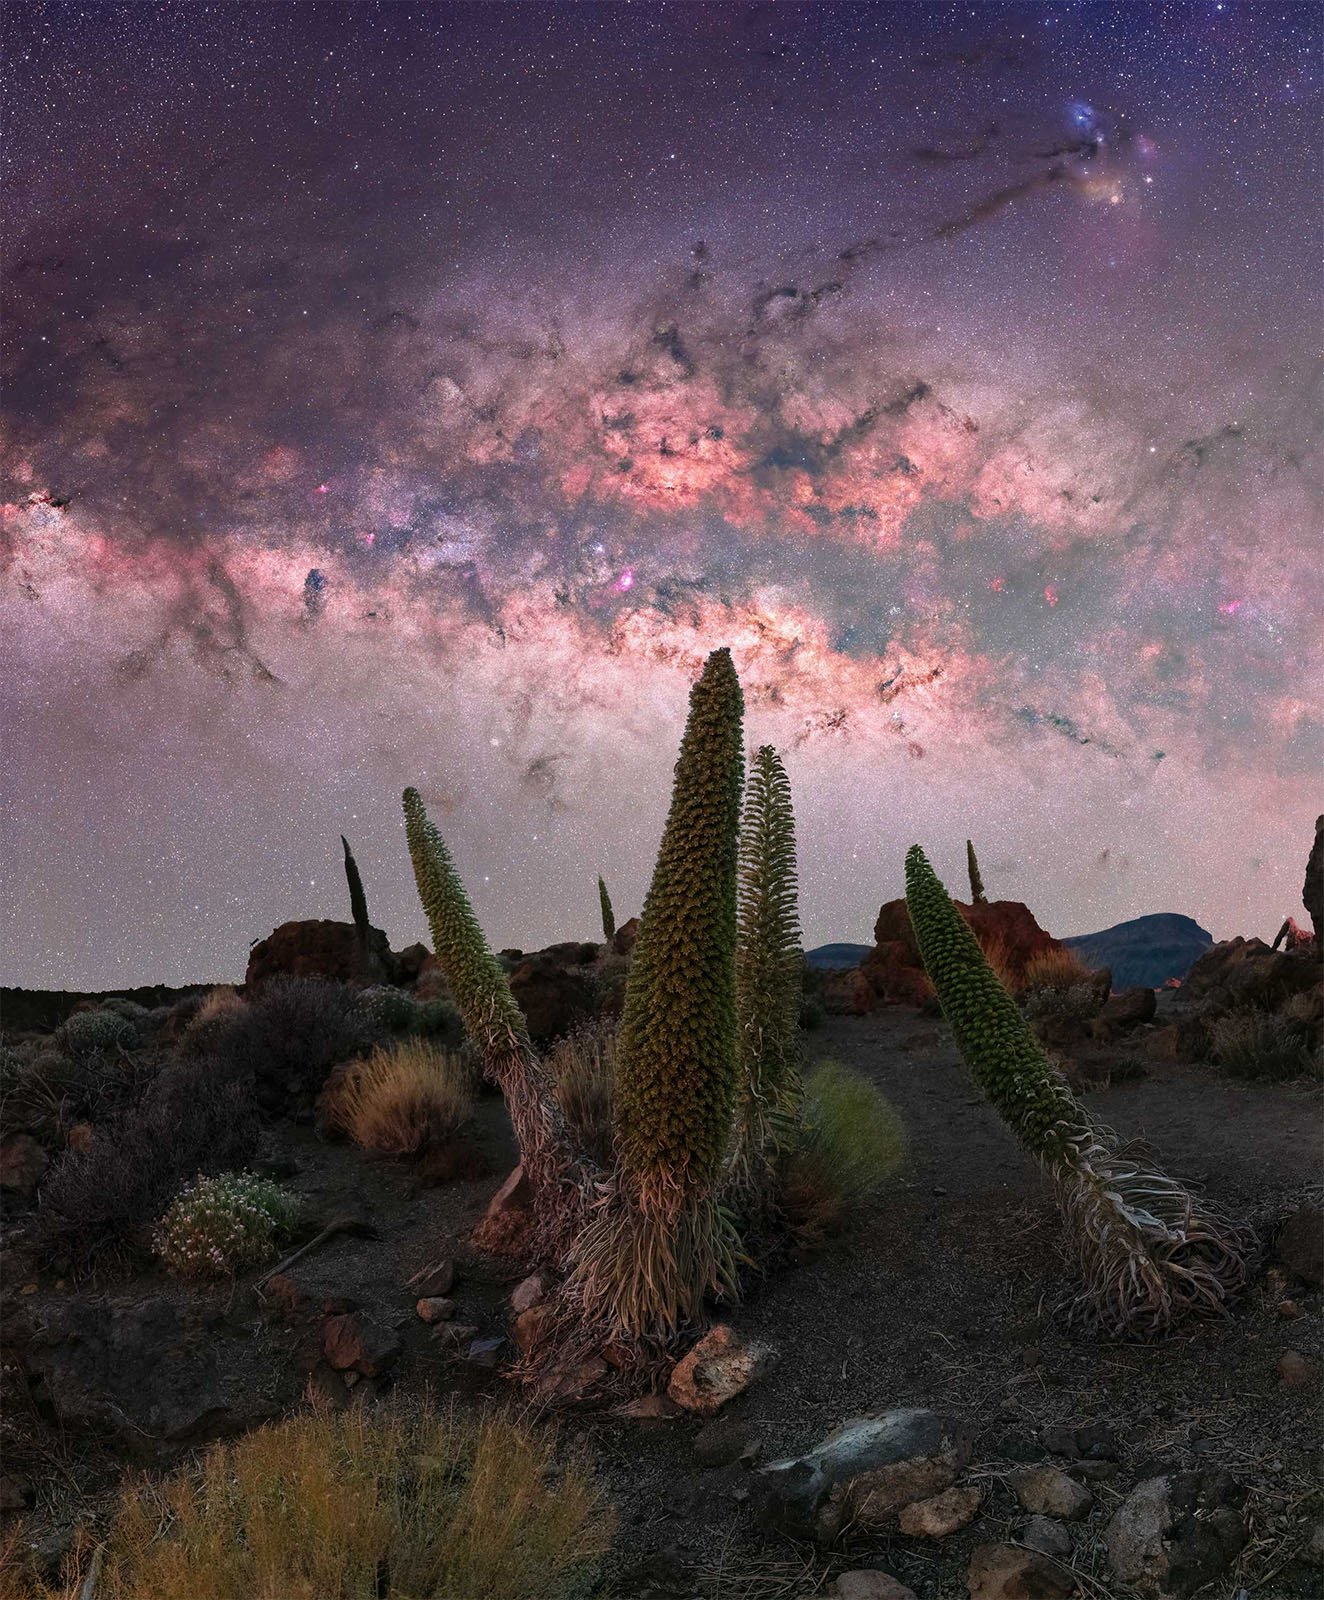  Panoramic view of a vibrant, star-filled night sky with the Milky Way galaxy prominently visible. The foreground features rugged terrain with tall, spiky plants and scattered rocks, creating a contrast between the earth and the expansive cosmos above.